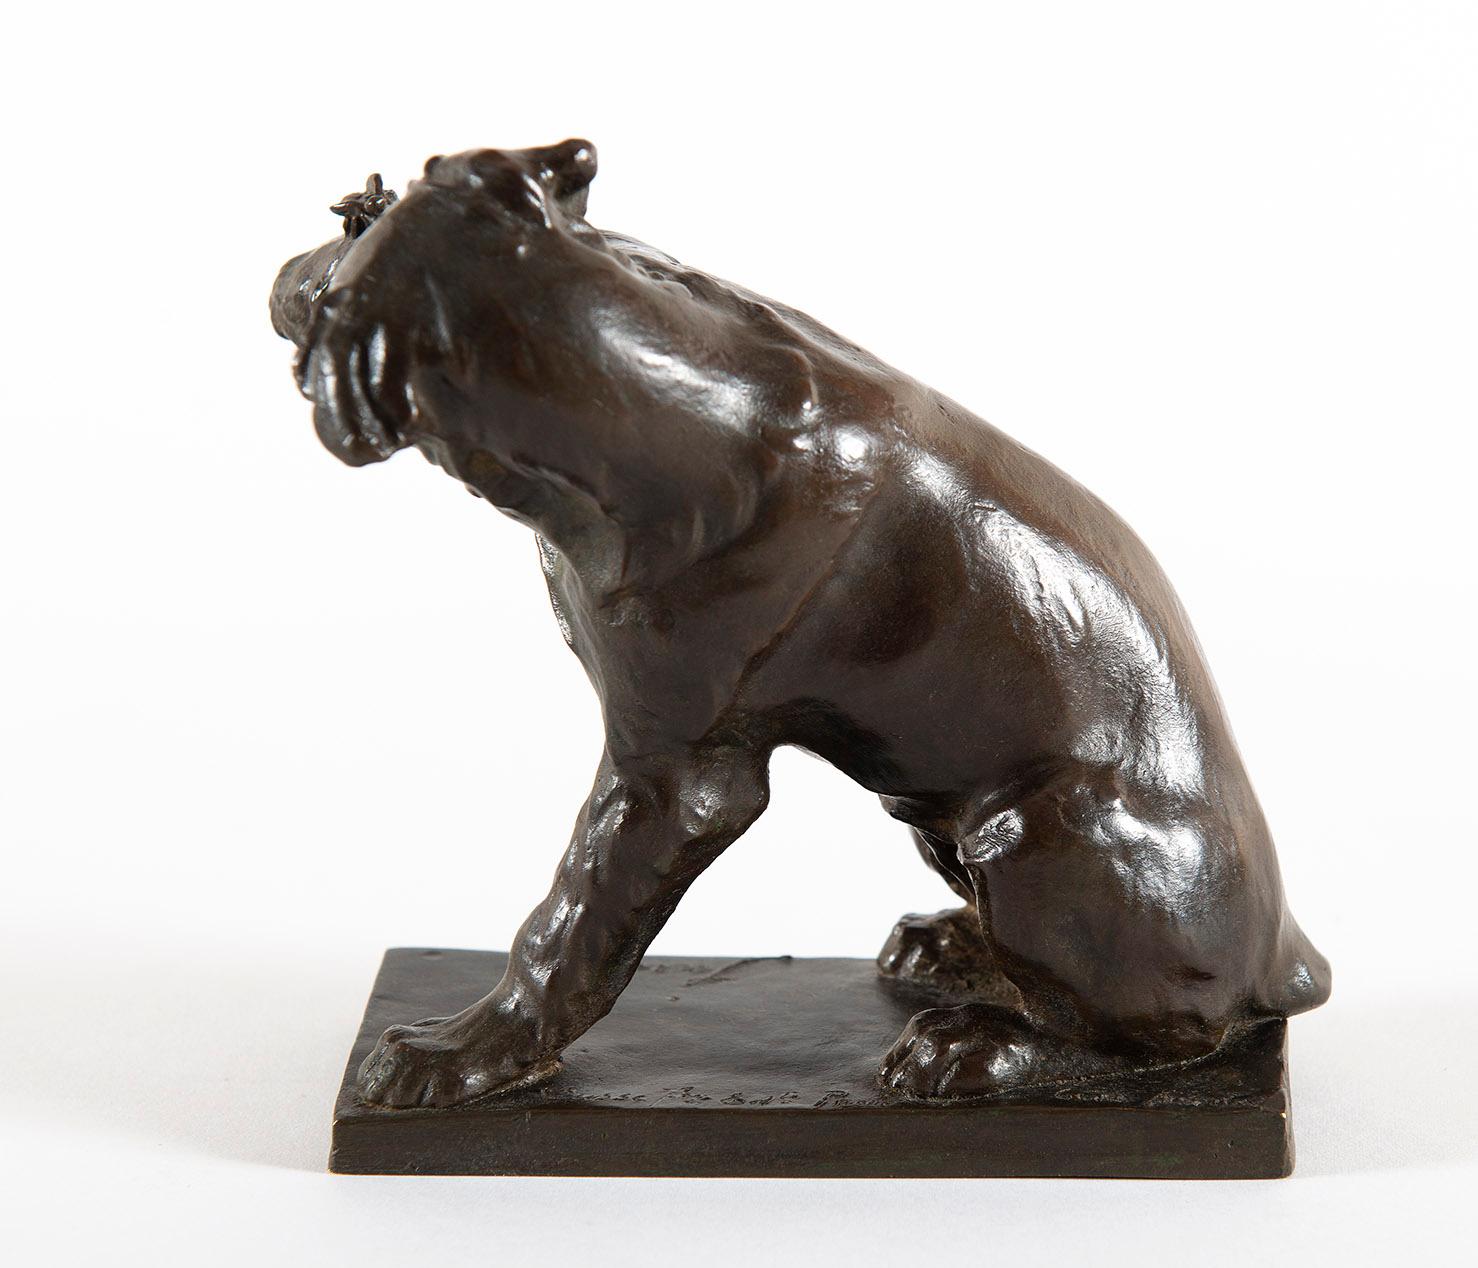 Chien à la sauterelle, by Sandoz, Animals, Sculpture, Bronze, 1910's, Dog

Chien à la sauterelle
Foundry : Susse Fondeur
circa 1918-1930
Bronze with brown patina and shade of green
13 x 13 x 9 cm
Signed and seal of the foundry on the base : Susse